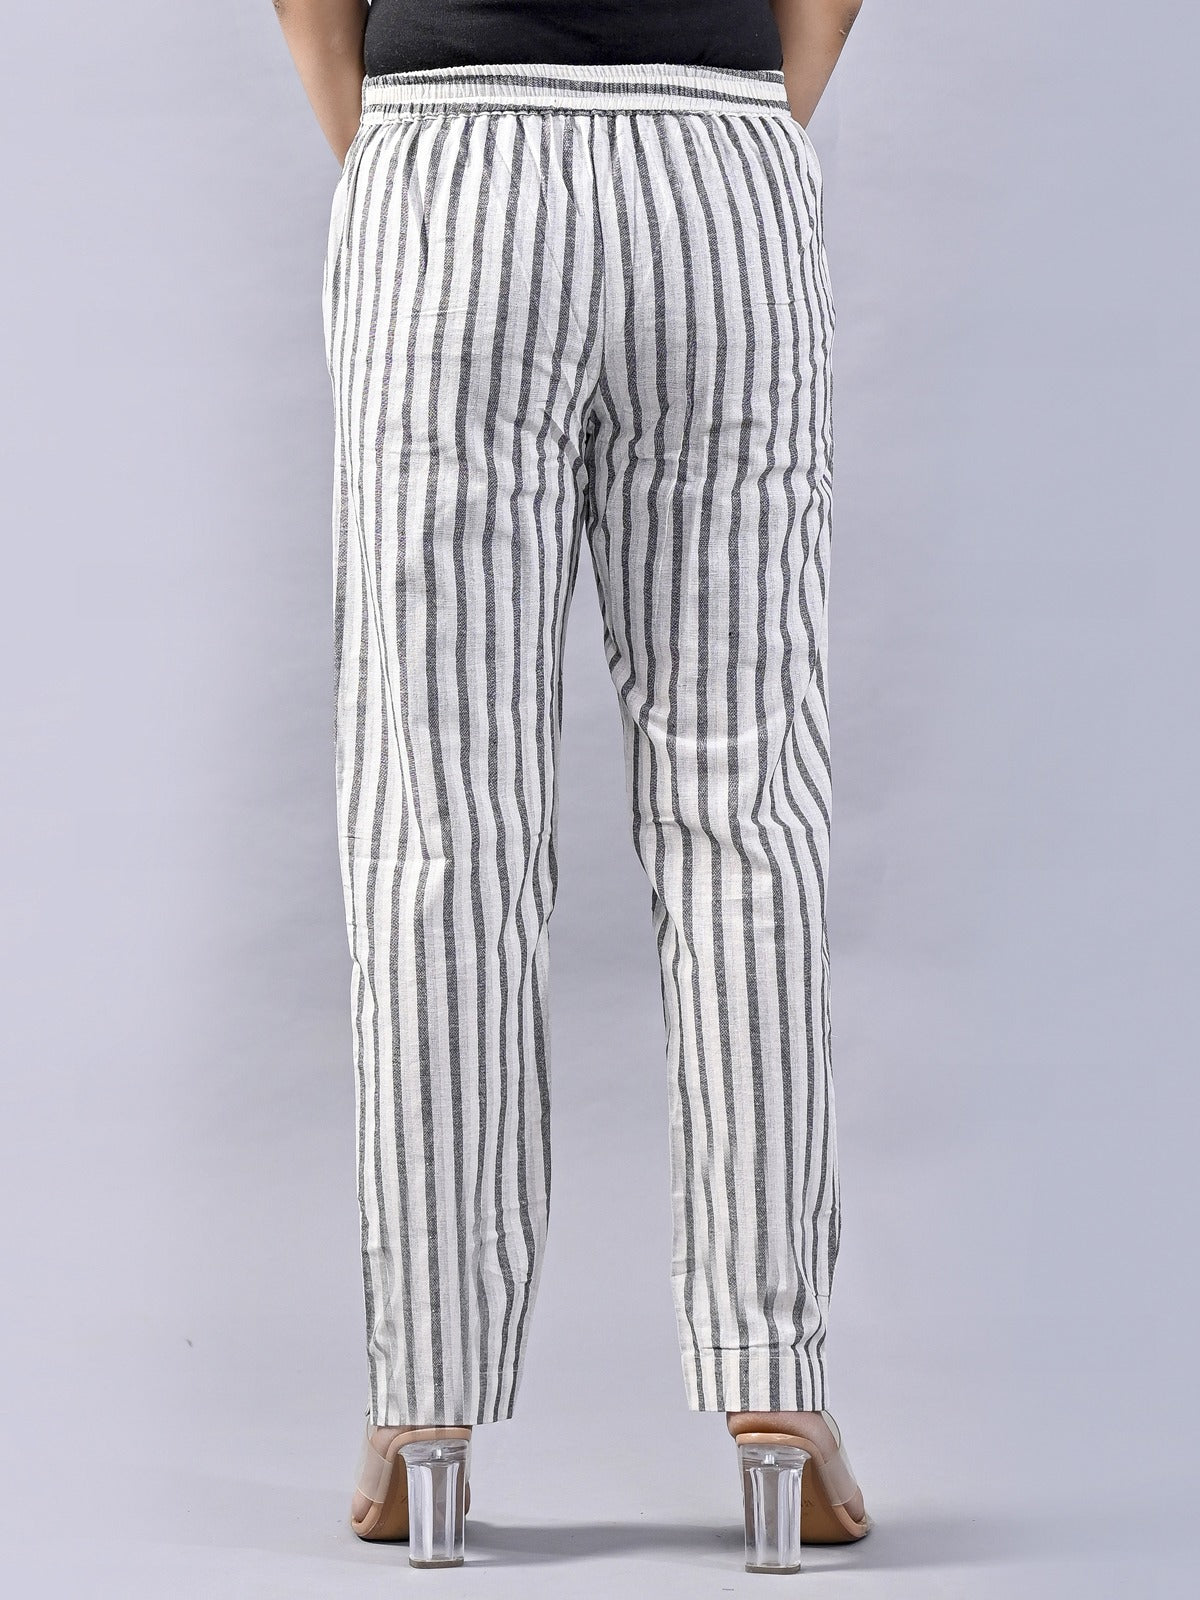 Pack Of 2 Green And Light Grey Womens Cotton Stripe Pants Combo